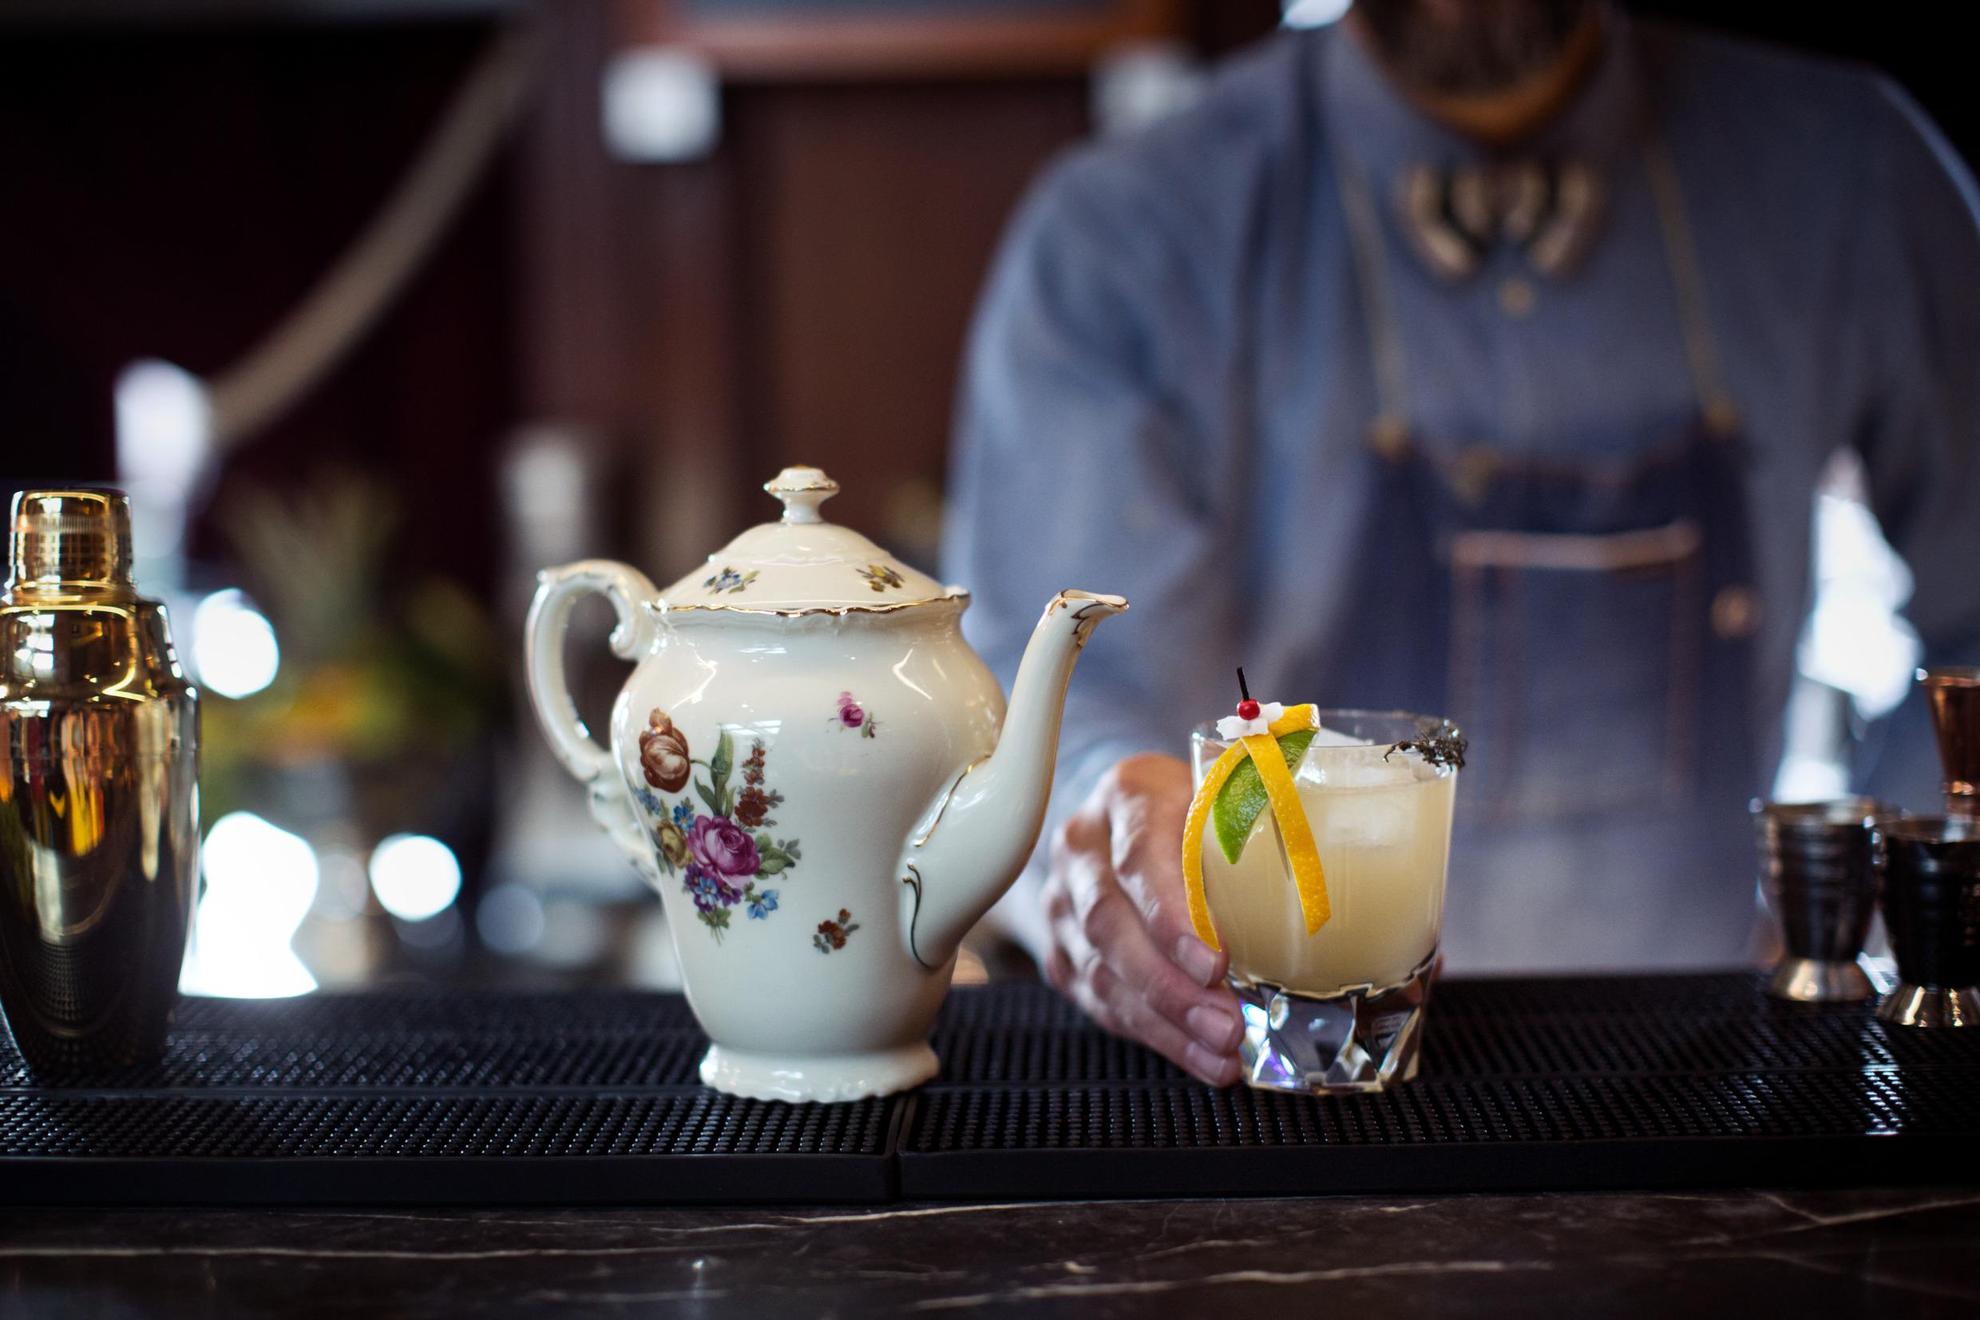 A bartender serving a cocktail decorated with citrus fruit, with a porcelain teapot and a shaker standing next to it.